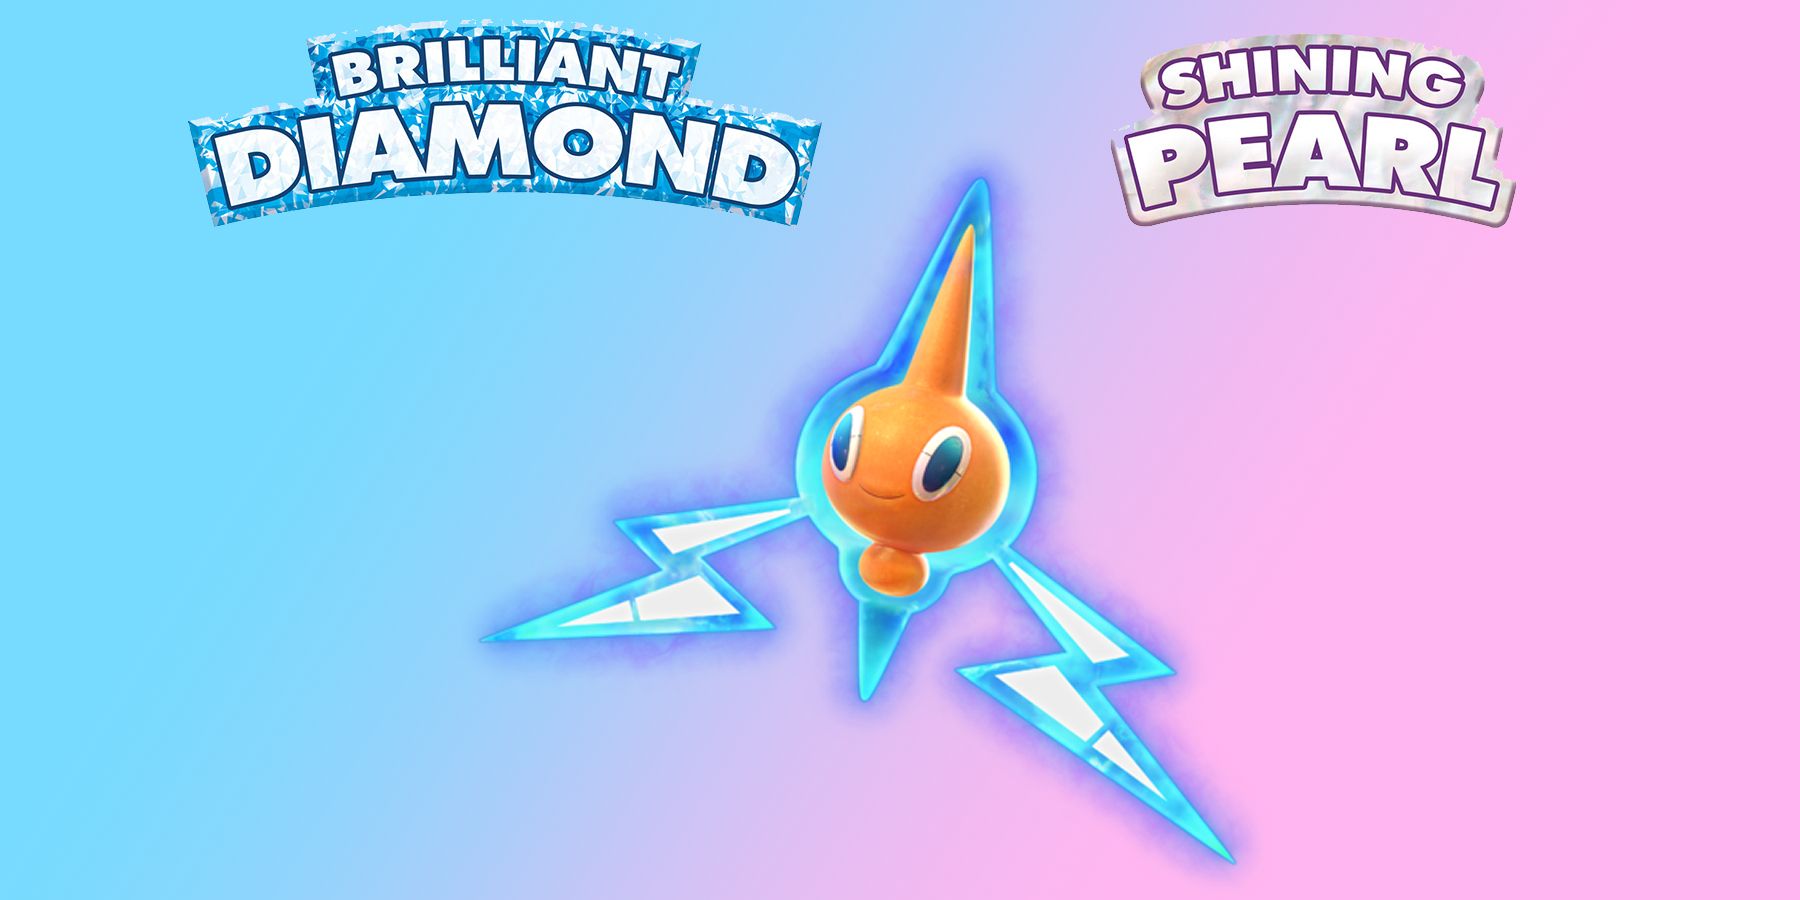 How to get Rotom Forms in Pokémon Brilliant Diamond & Shining Pearl